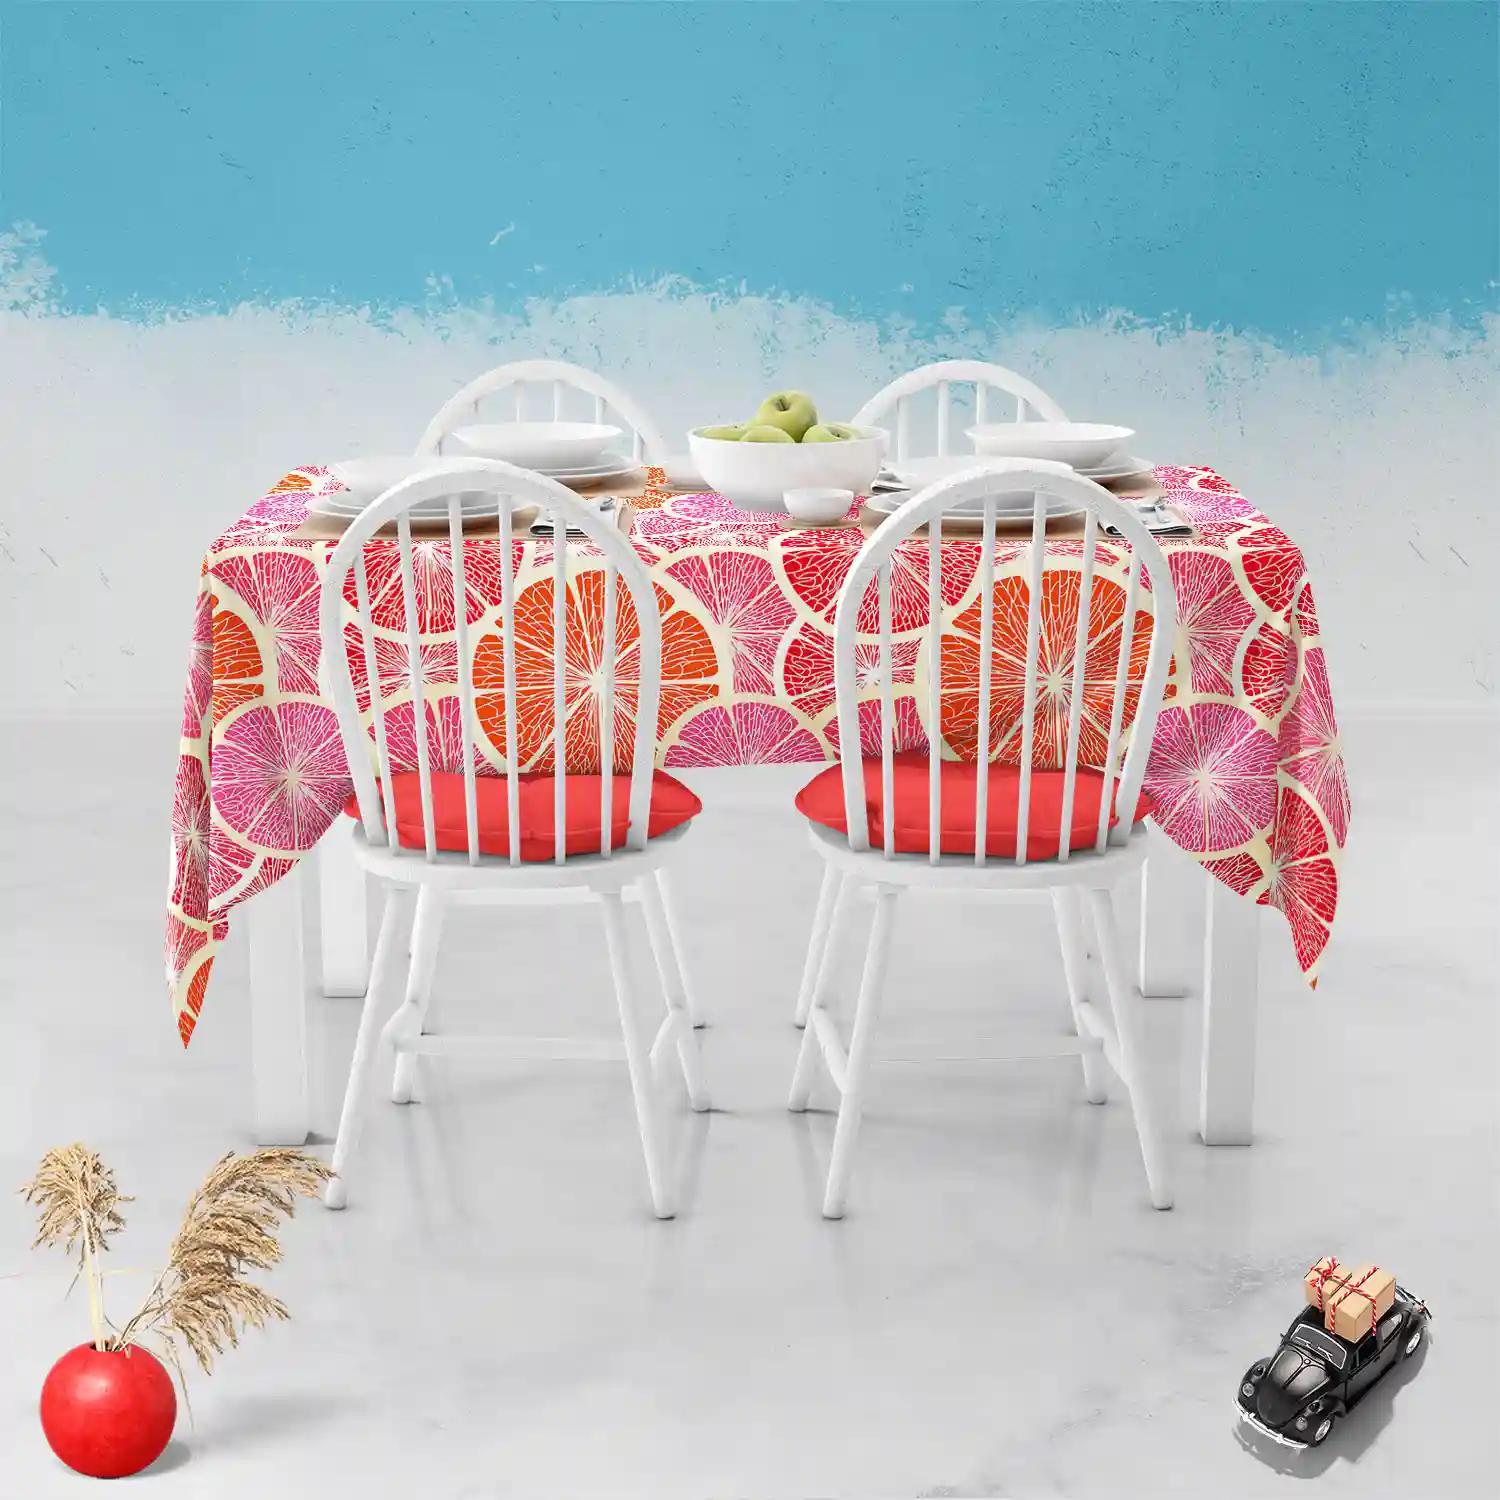 ArtzFolio Grapefruit | Table Cloth Cover for Dining & Center Table